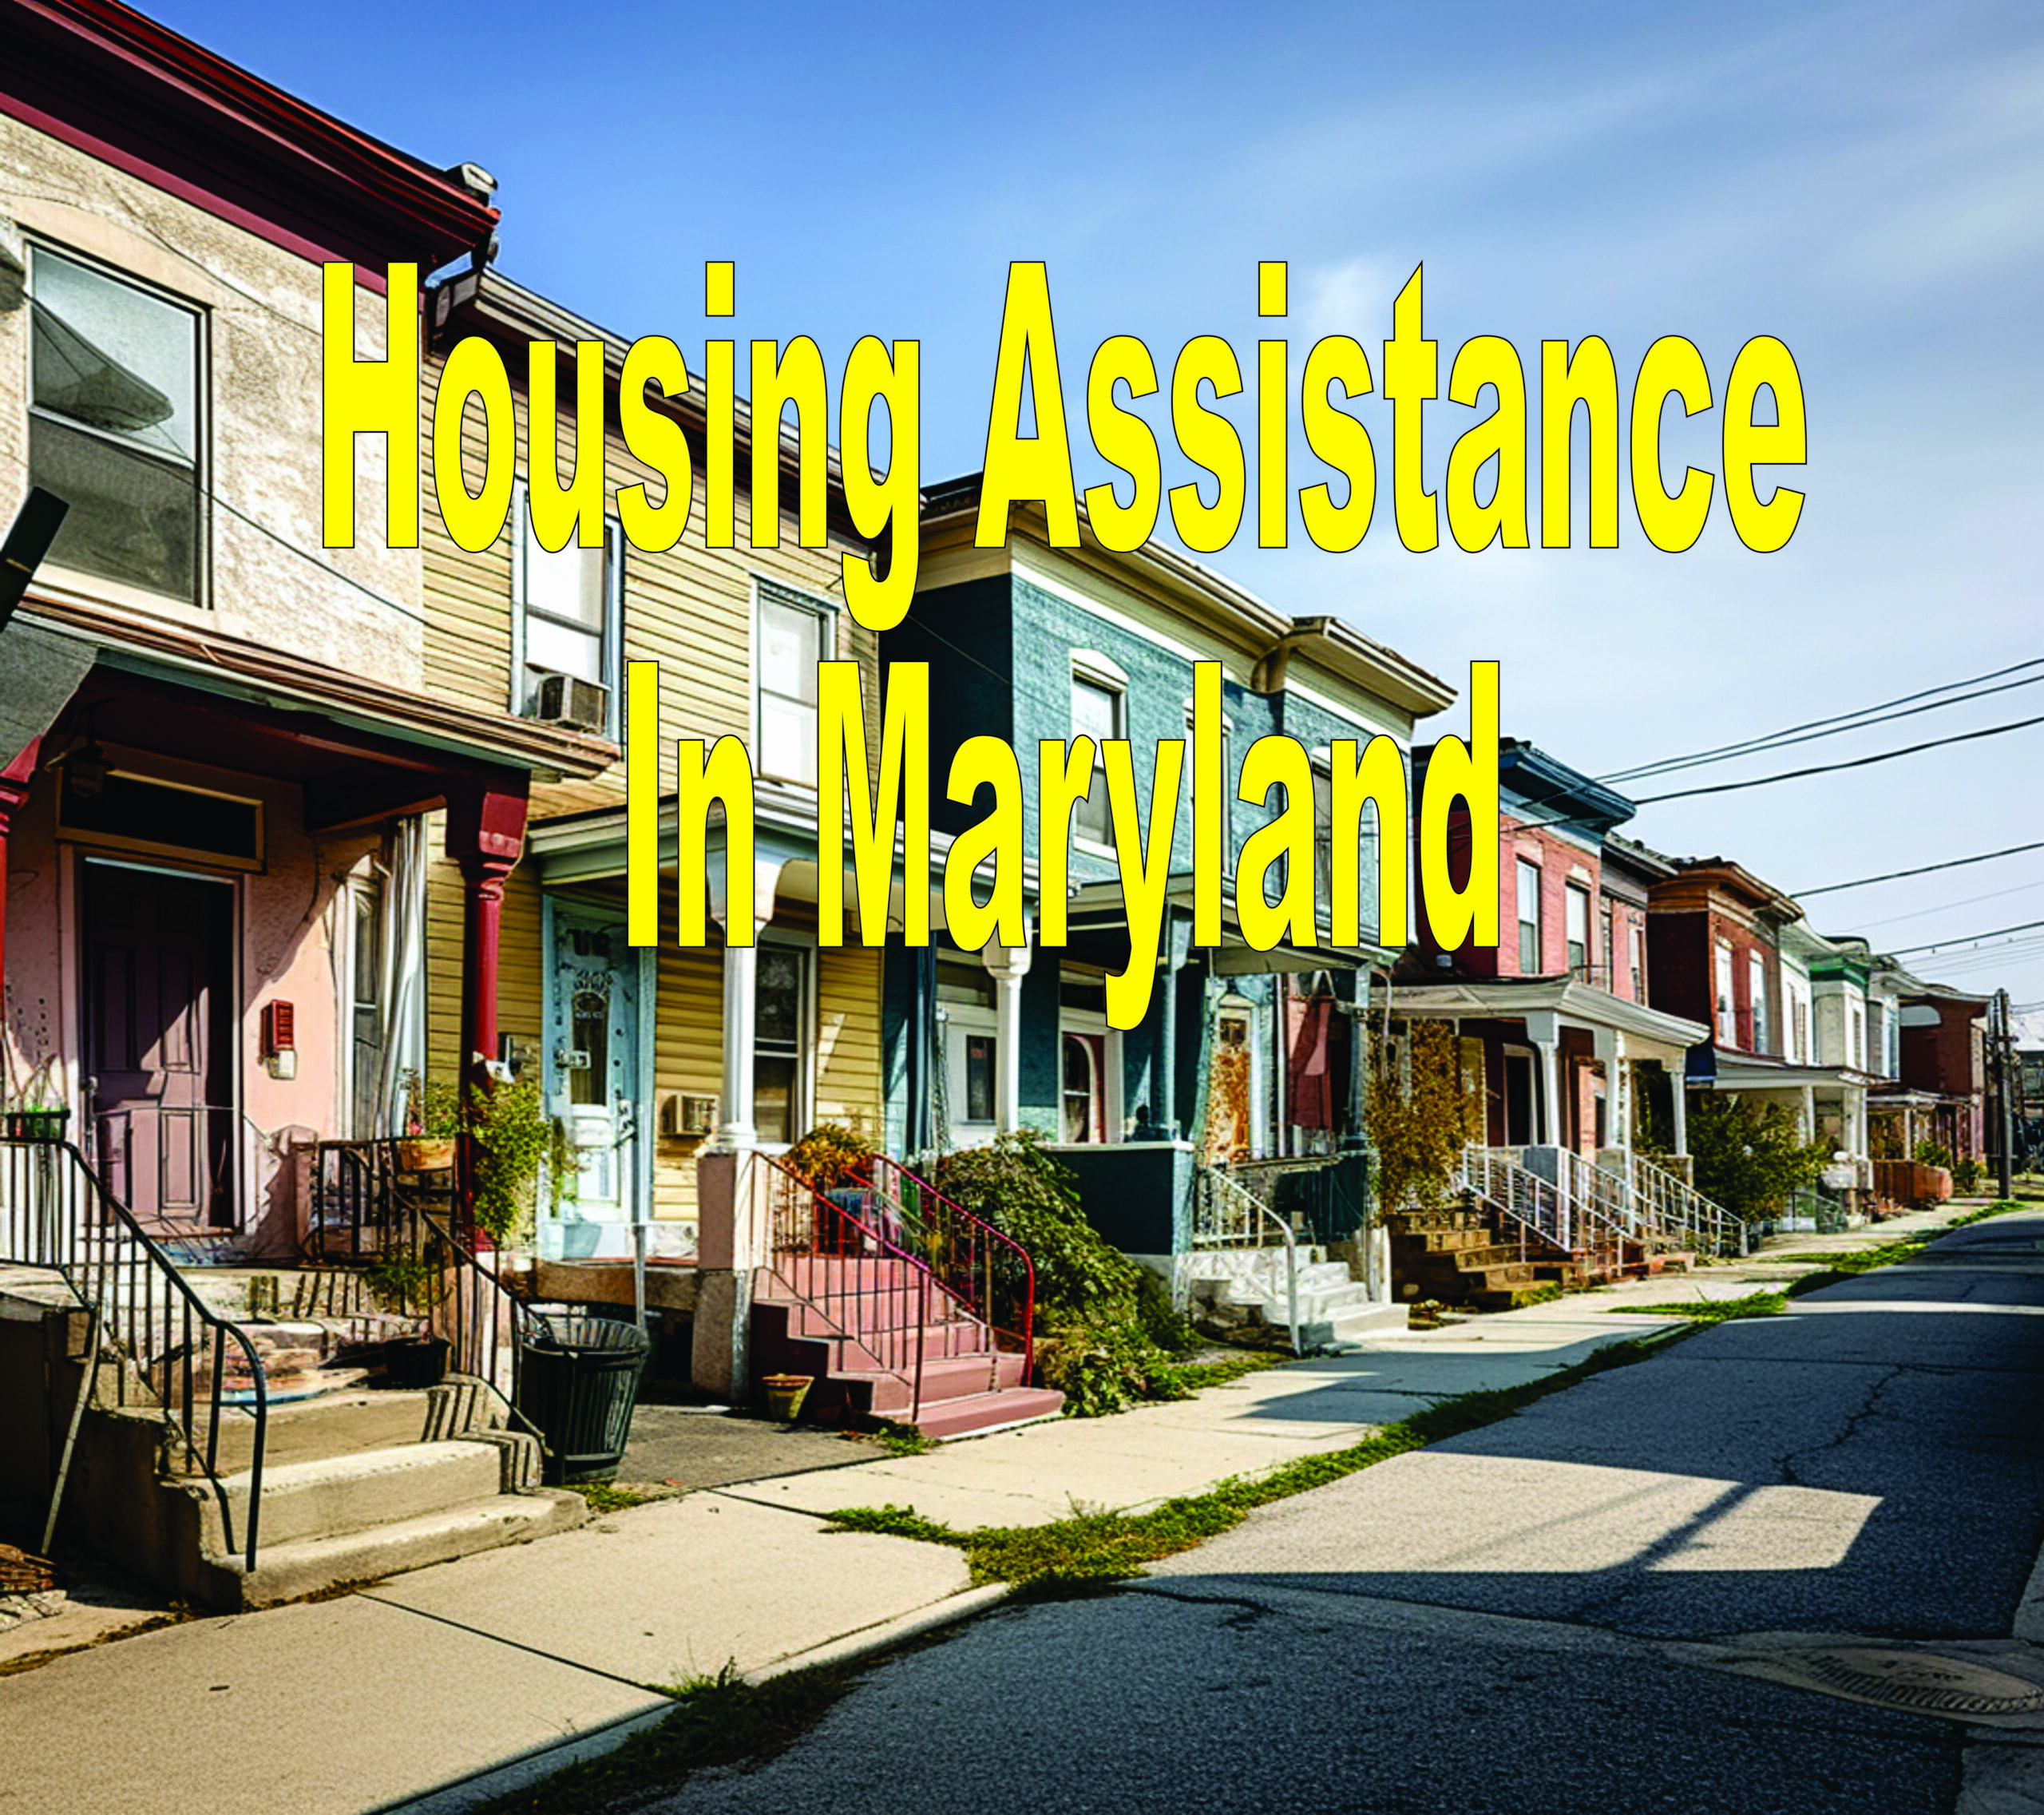 Housing Assistance In Maryland